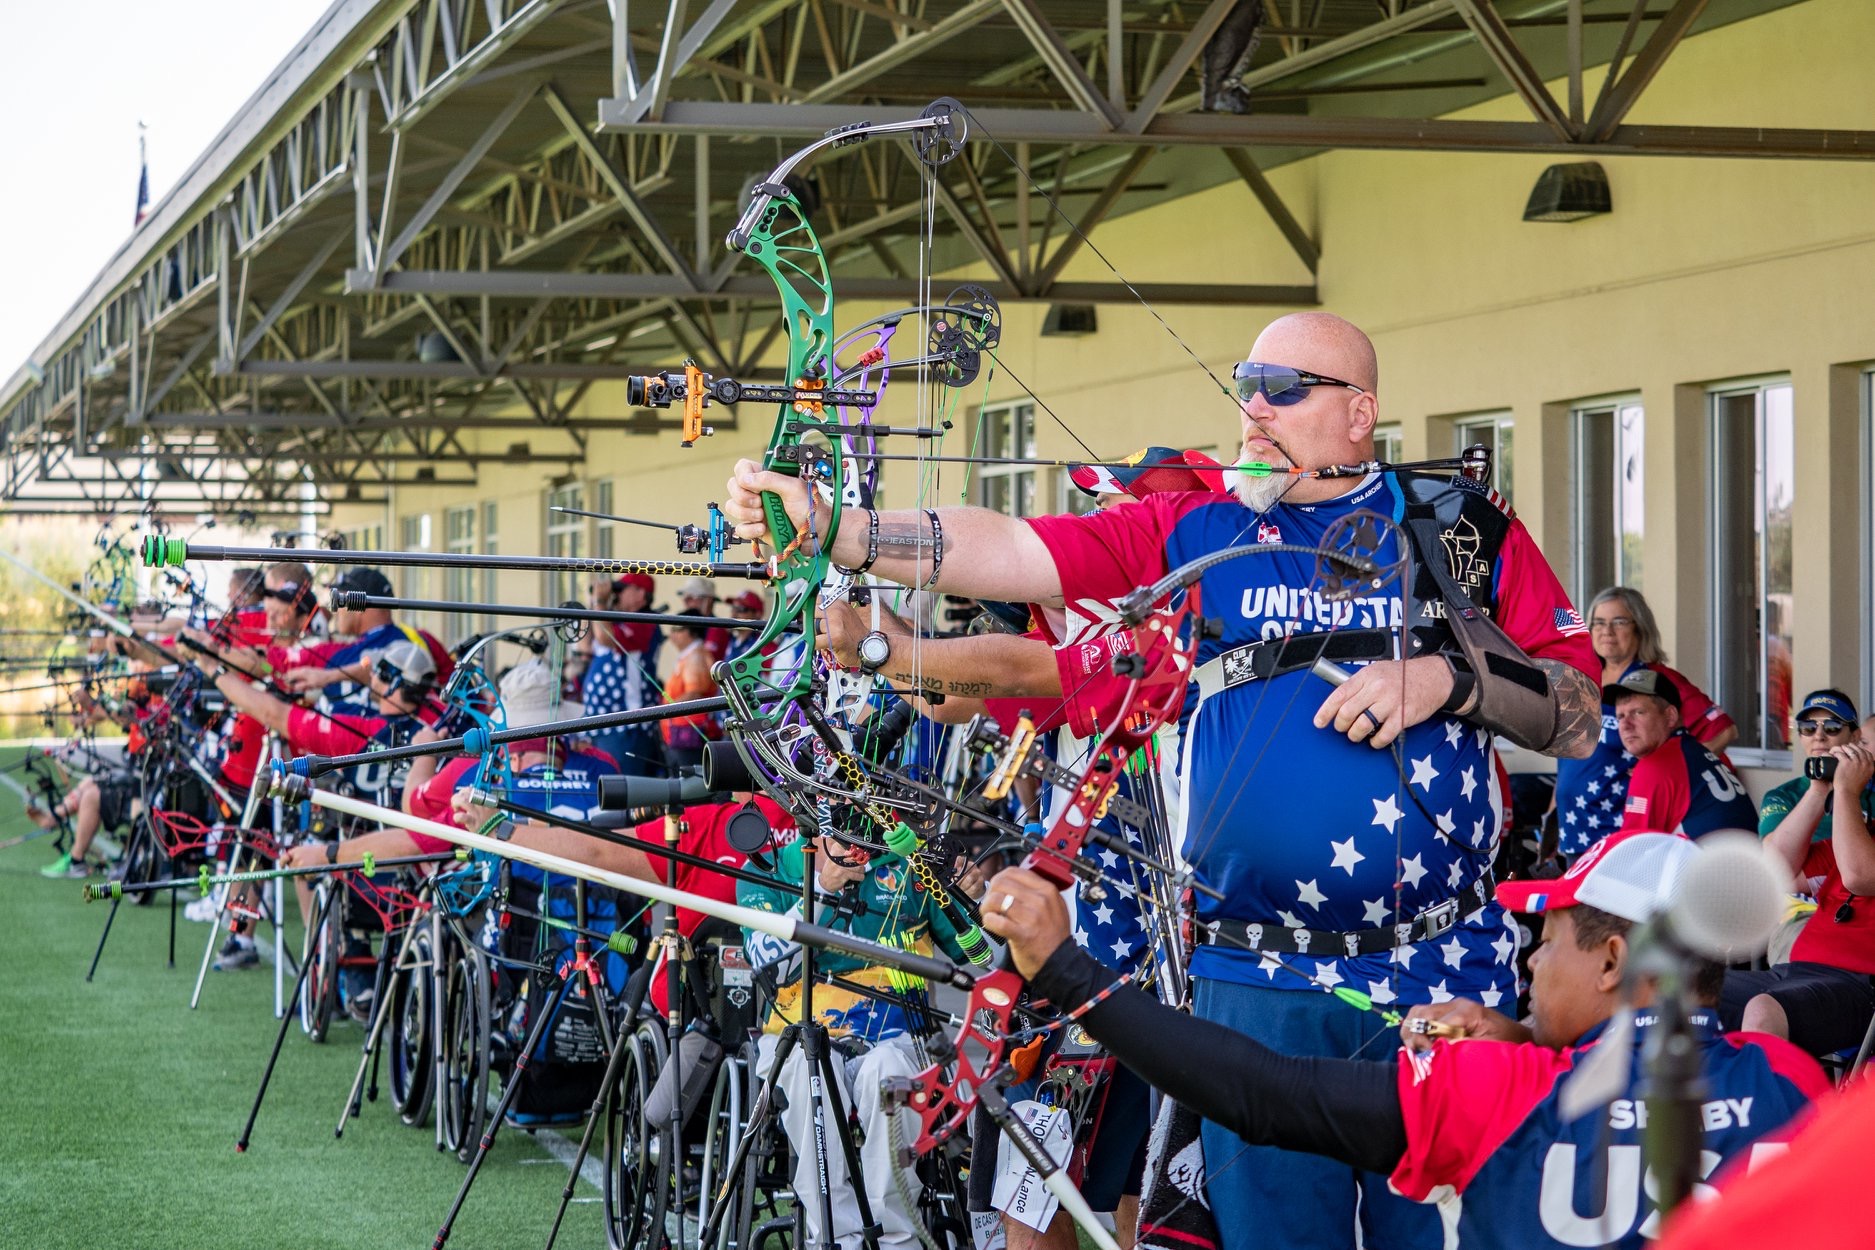 Multiple athletes using adaptive archery equipment and aiming towards targets off camera